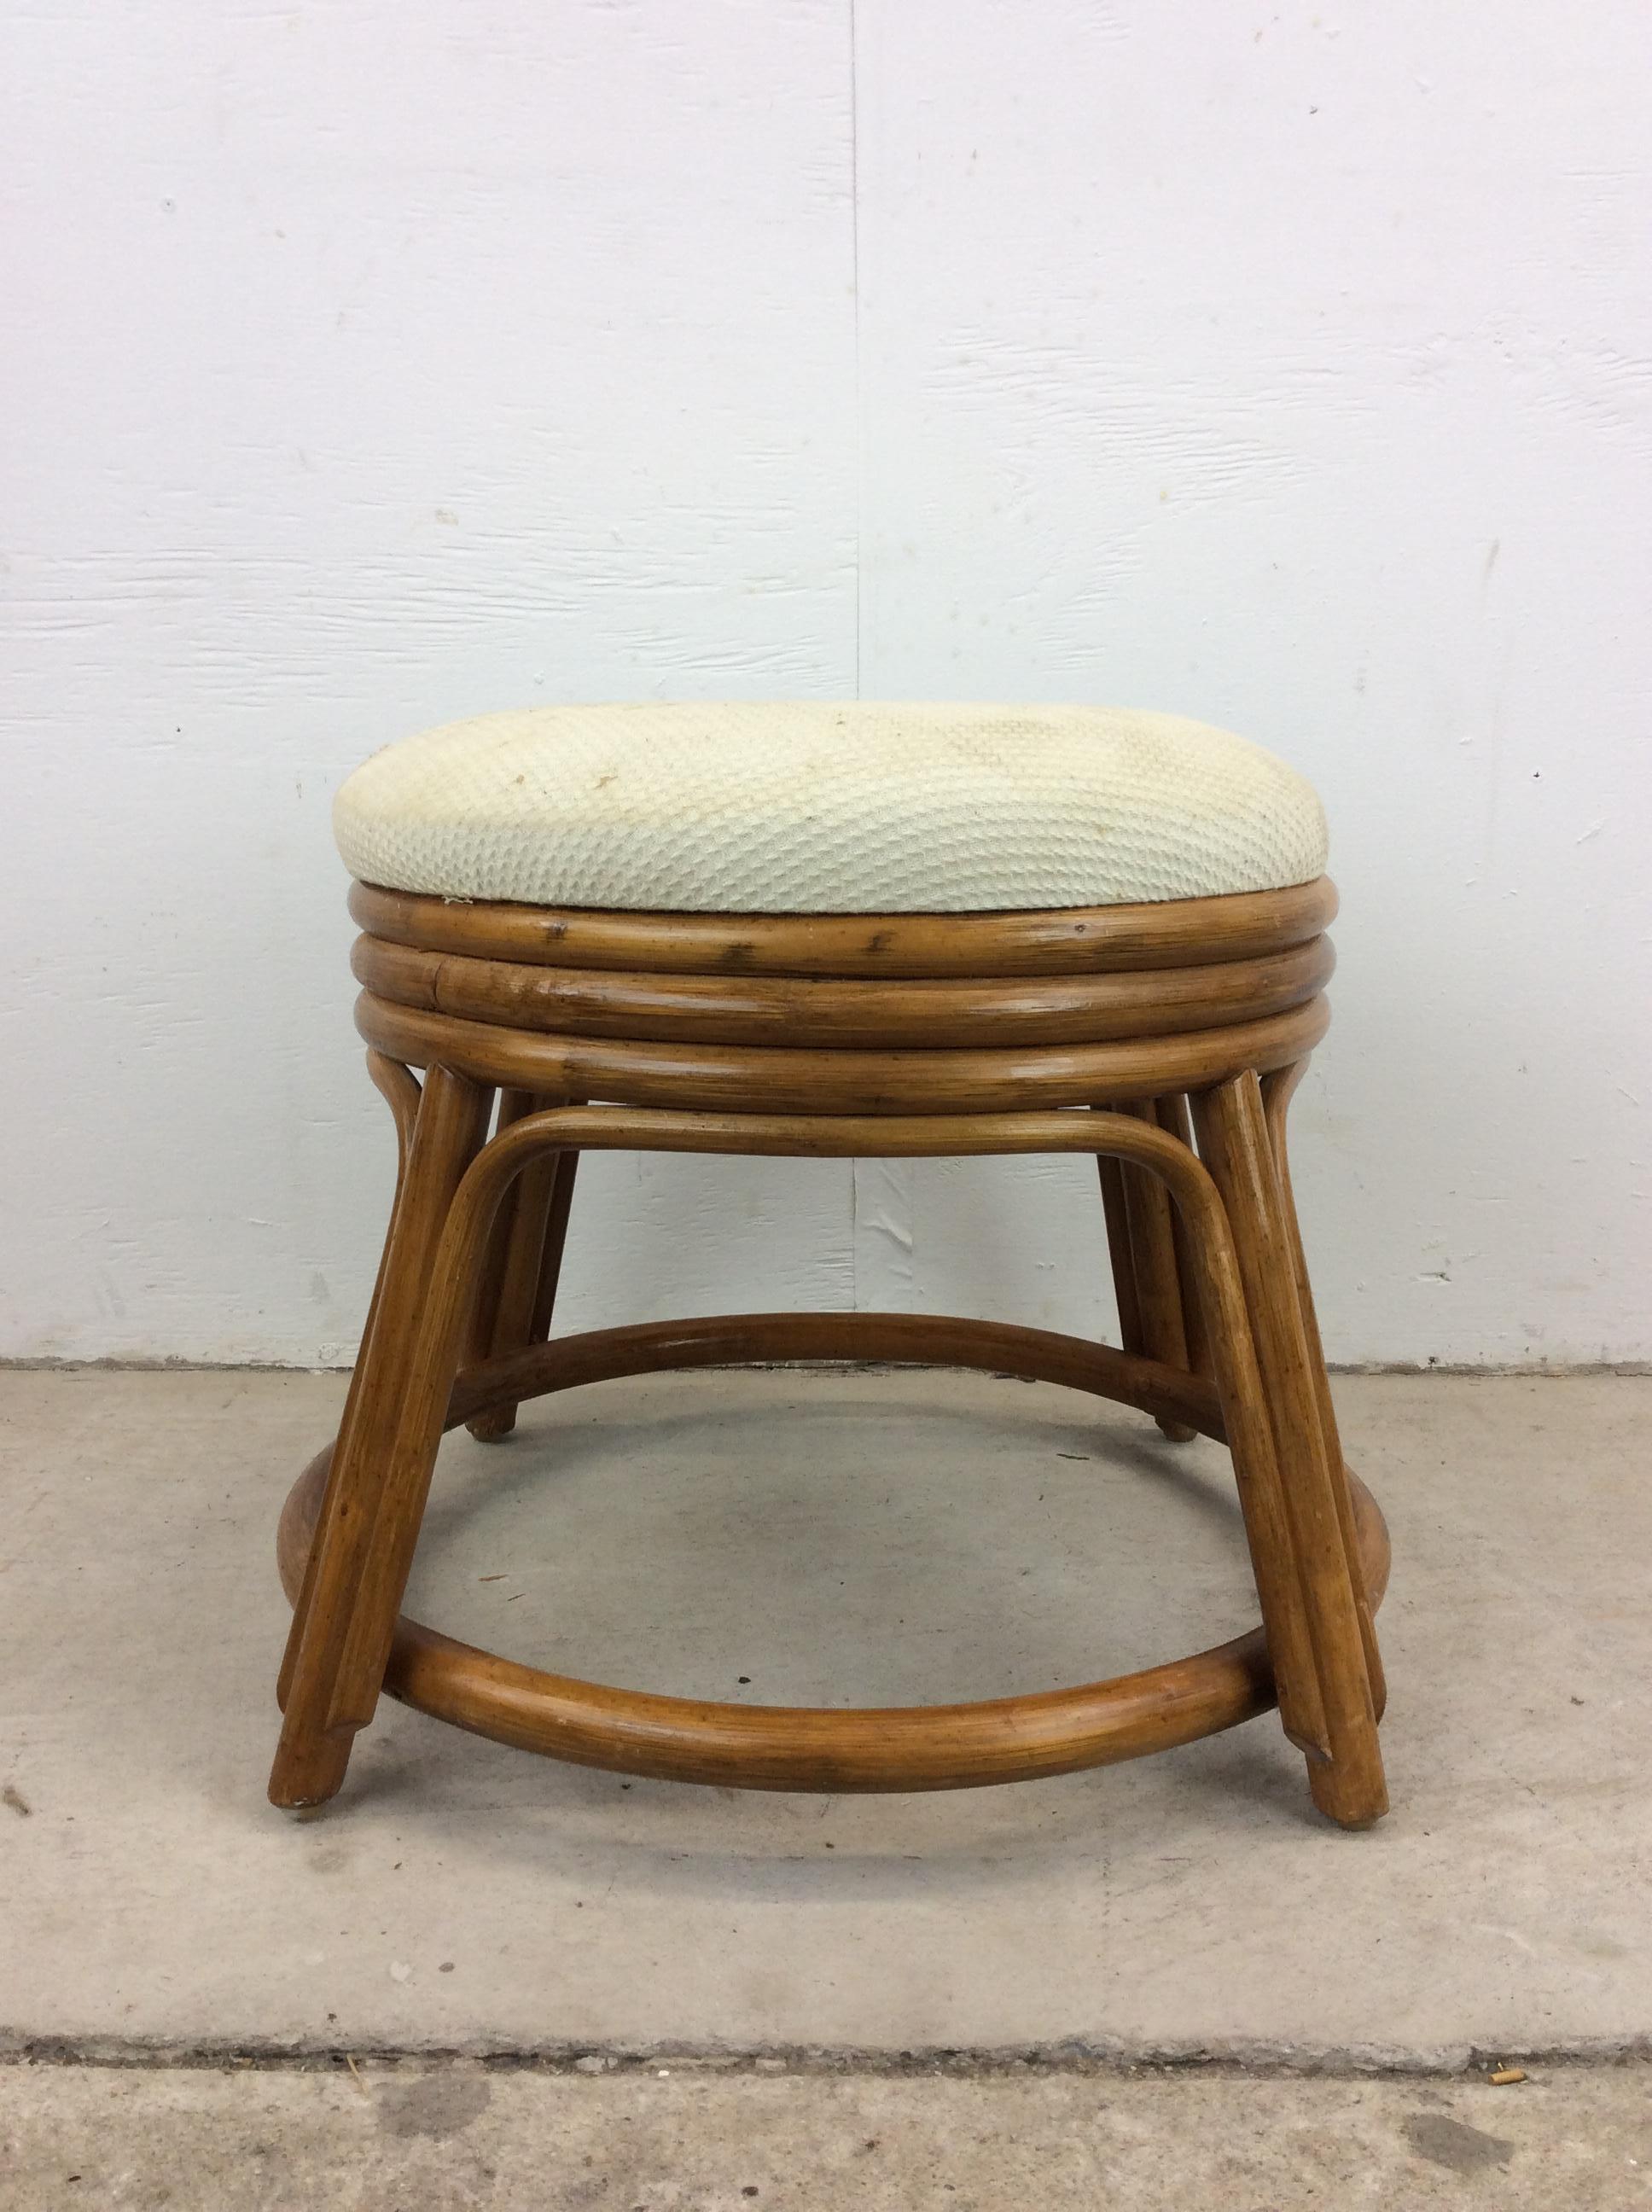 This vintage ottoman footstool features curved rattan frame and upholstered top with vintage fabric.

Please check out our other rattan listings!

Dimensions: 19w 19d 17h

Condition: Rattan frame has some scuffs, scratches, and kick marks.  There is